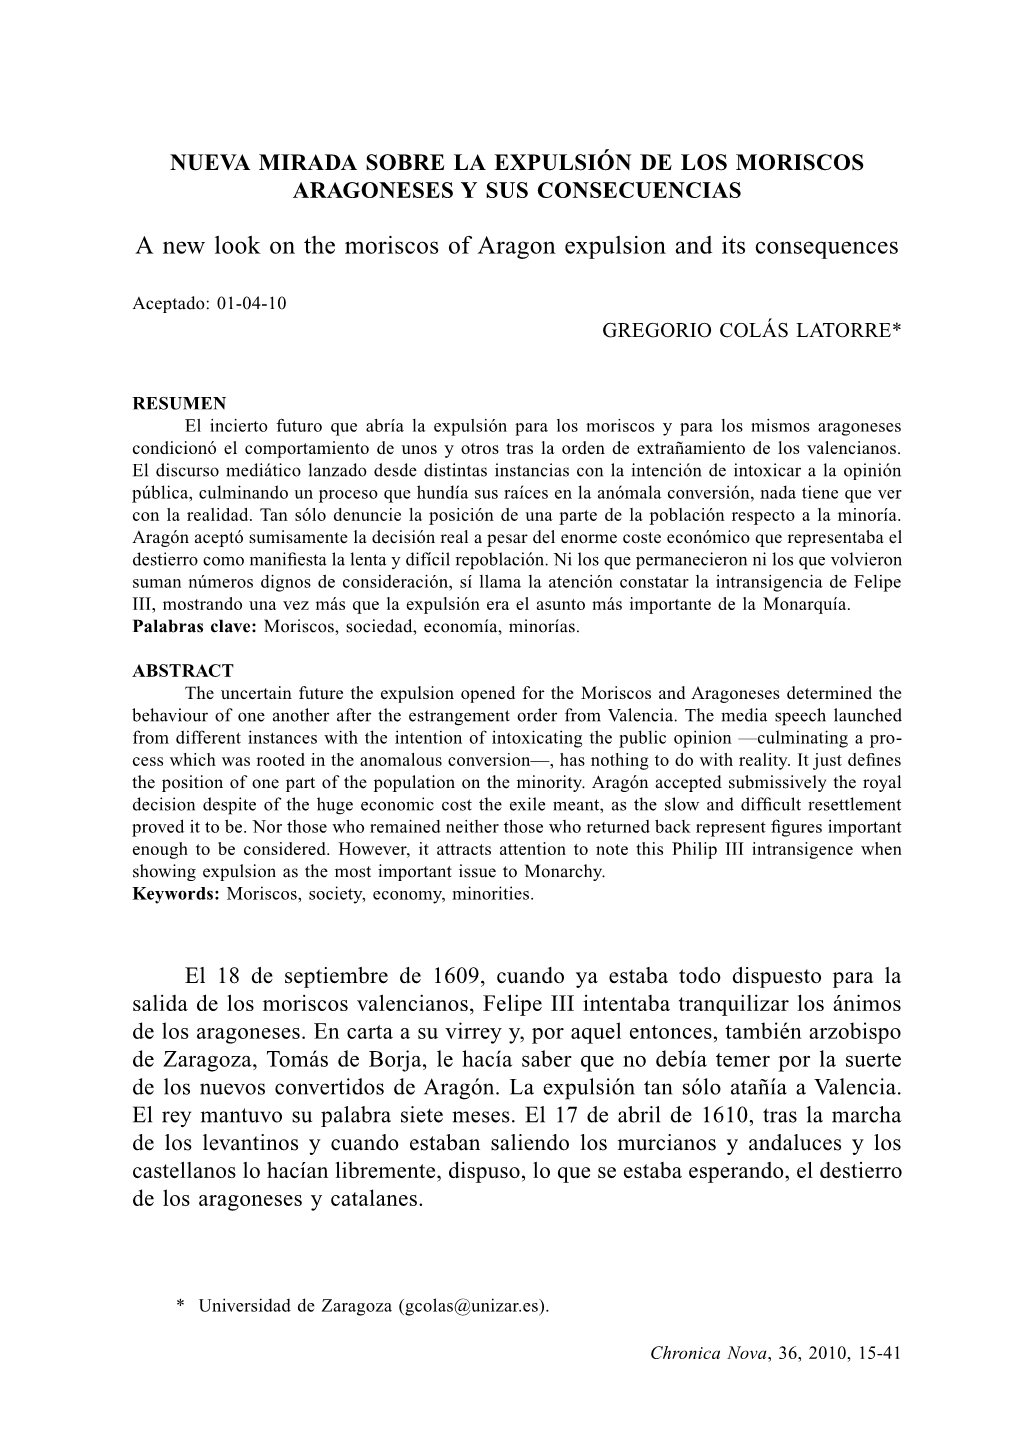 A New Look on the Moriscos of Aragon Expulsion and Its Consequences